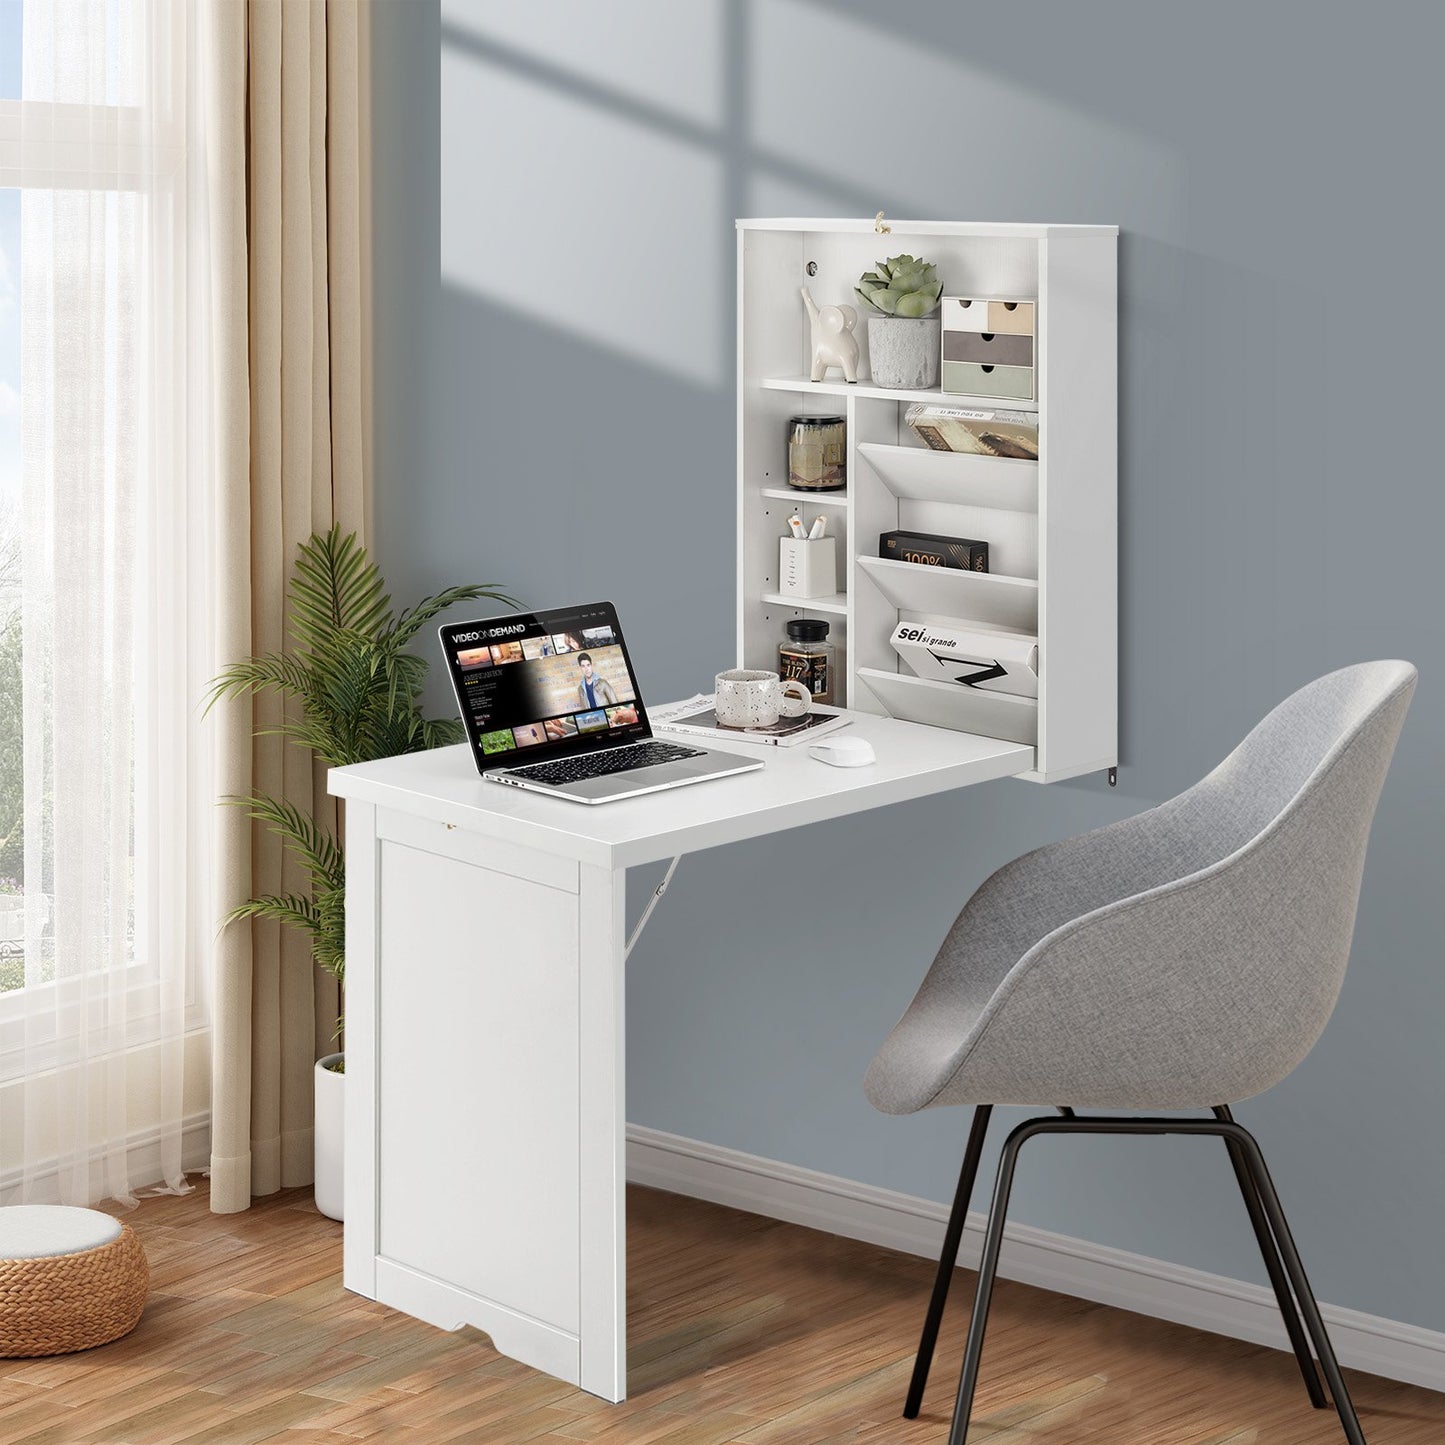 Wall Mounted Fold-Out Convertible Floating Desk Space Saver, White - Gallery Canada